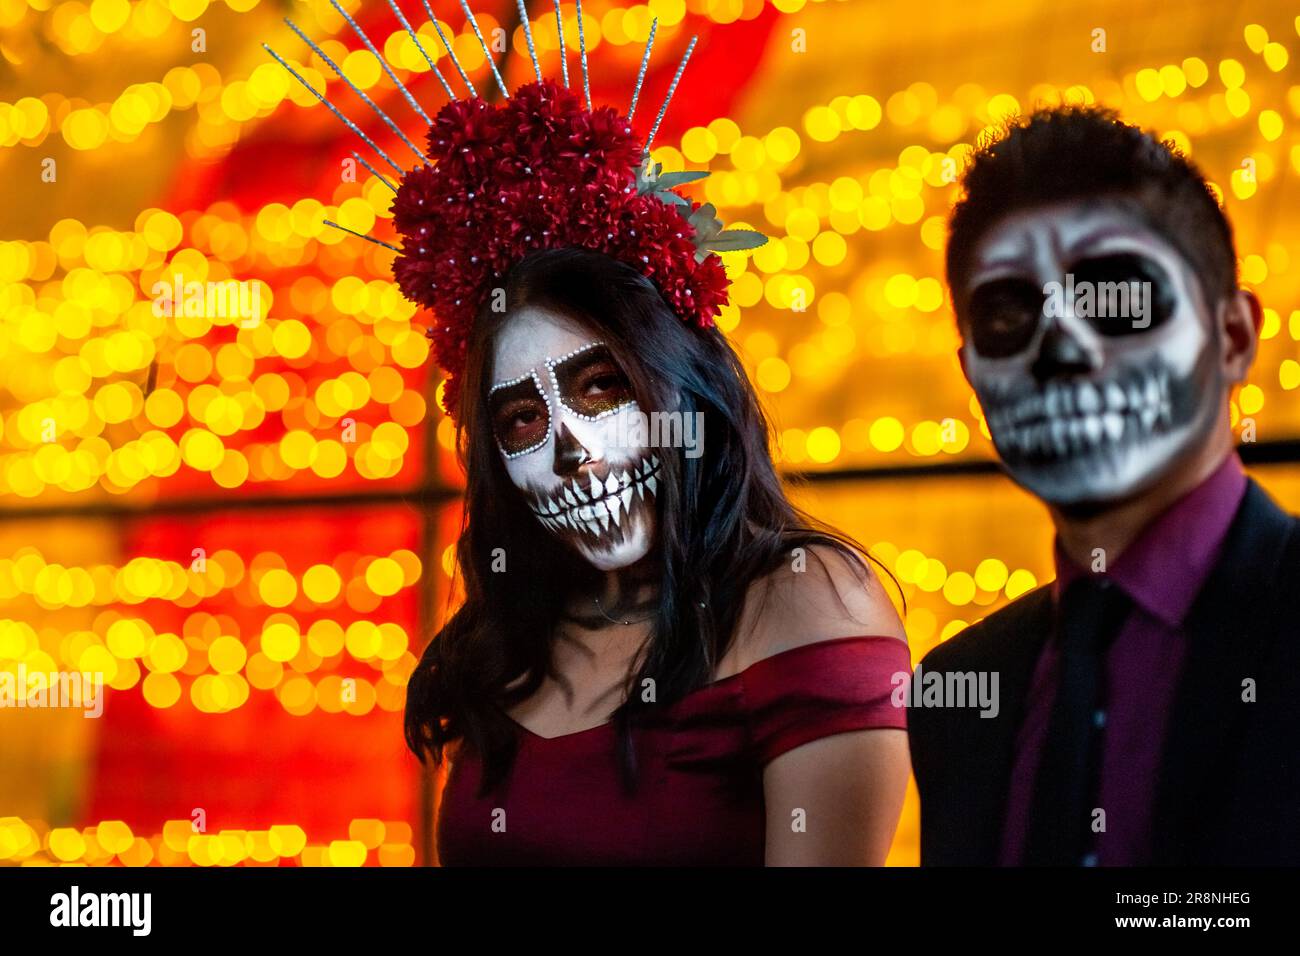 A Mexican woman, dressed as La Catrina, and a Mexican man, dressed as Catrín, take part in the Day of the Dead celebrations in Morelia, Mexico. Stock Photo